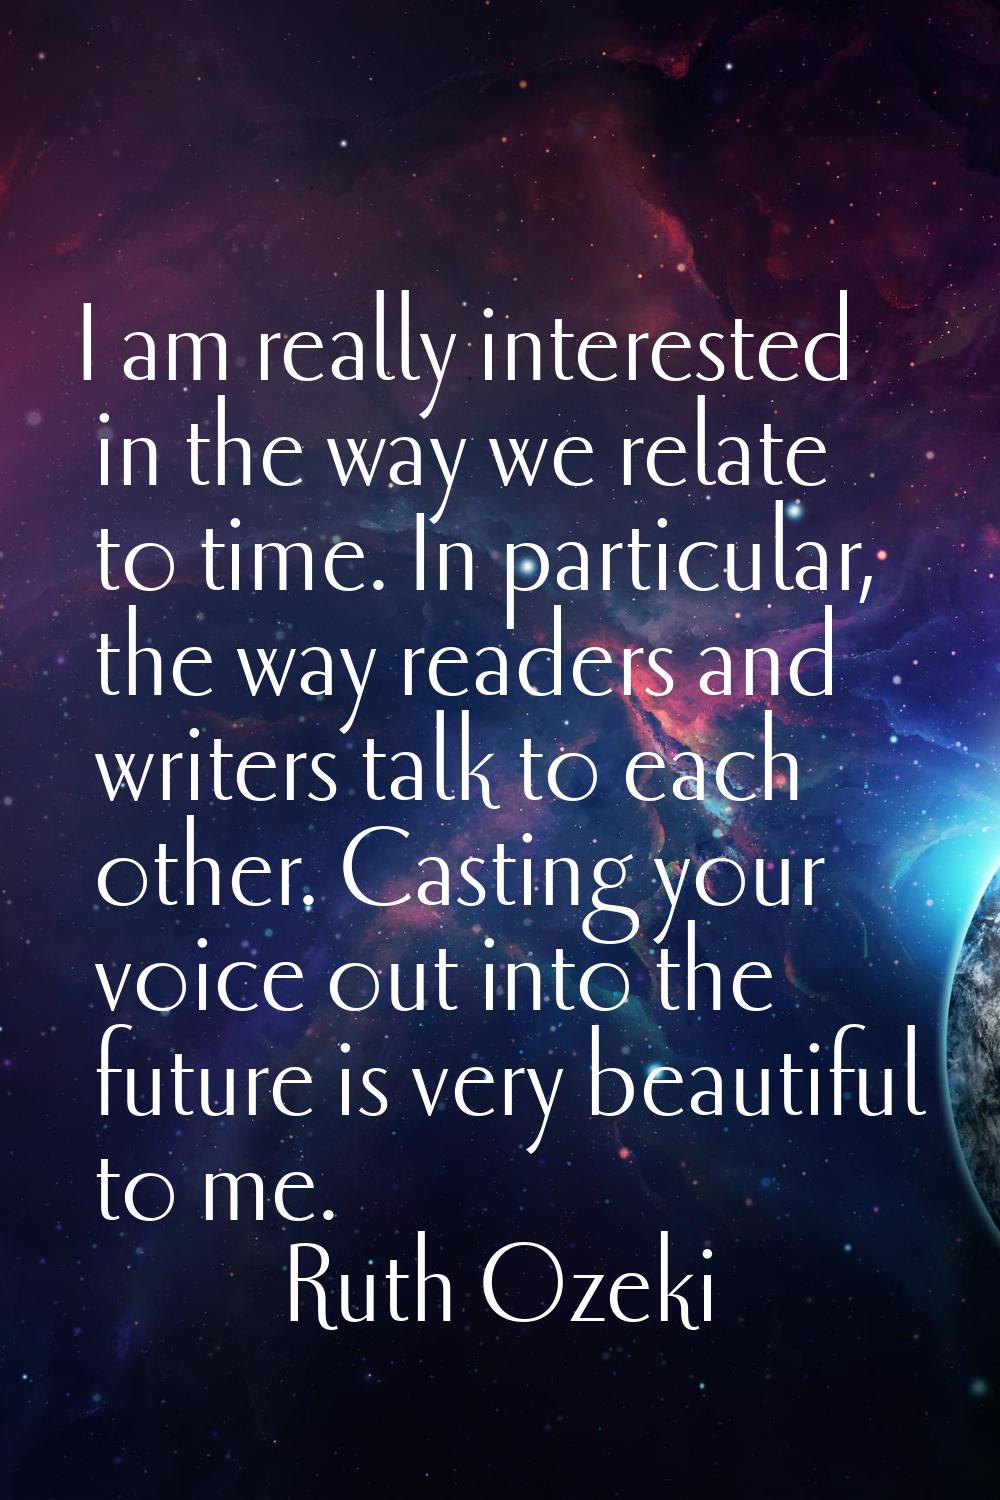 I am really interested in the way we relate to time. In particular, the way readers and writers tal